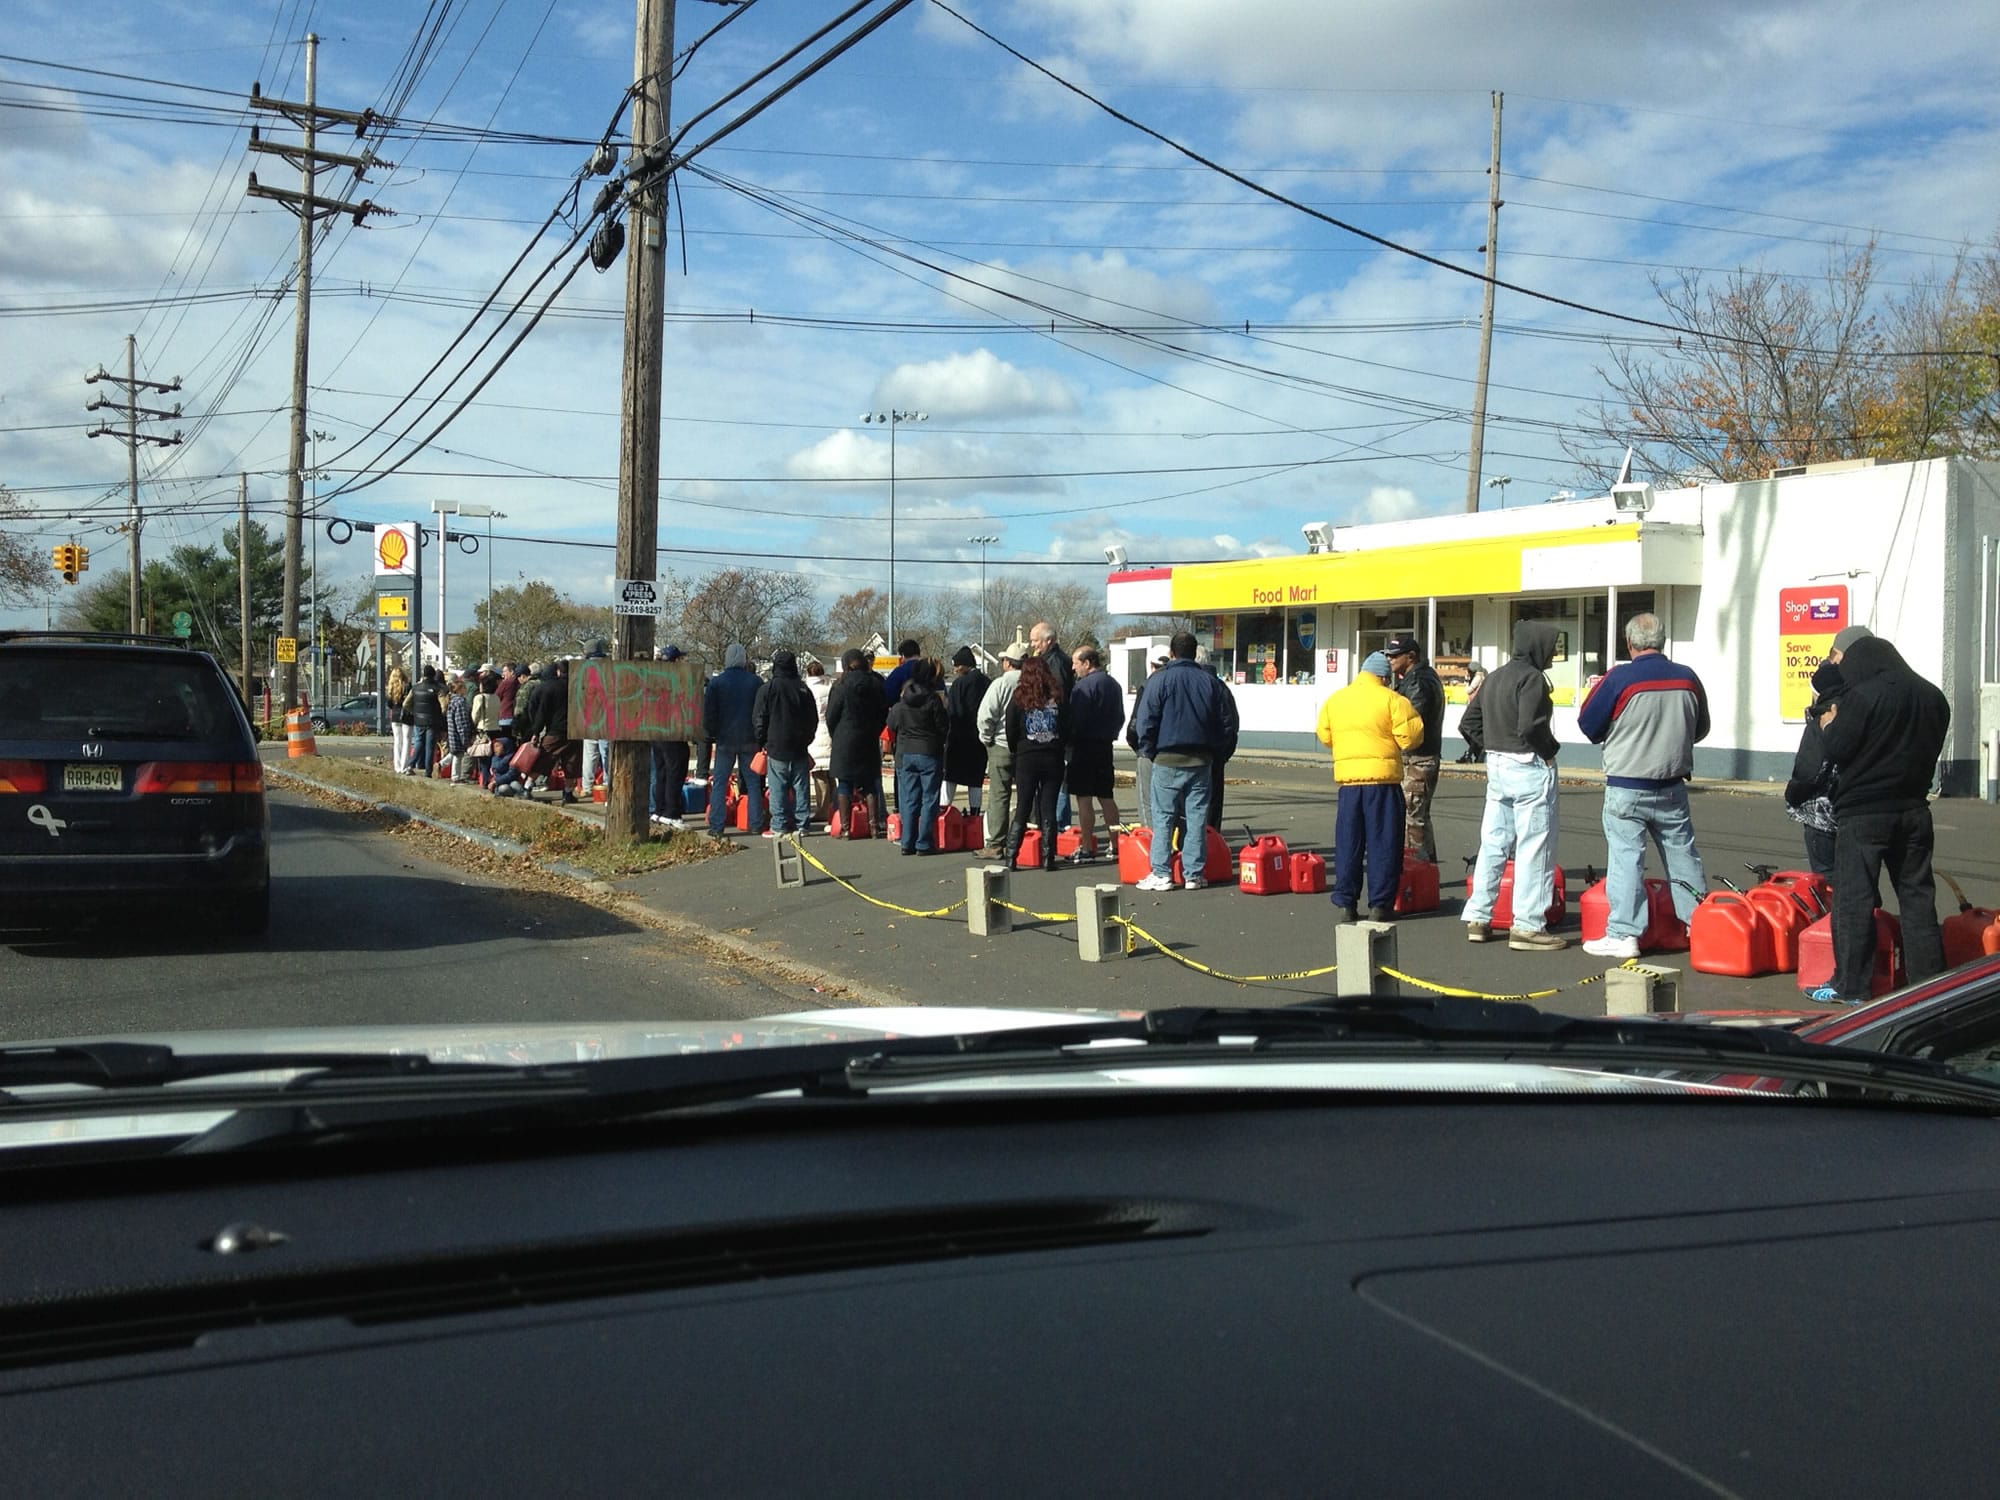 Heather Allmain/Clark Public Utilities
People stand in line for gas in New Jersey. Clark Public Utilities is in New Jersey to help restore power following Superstorm Sandy.